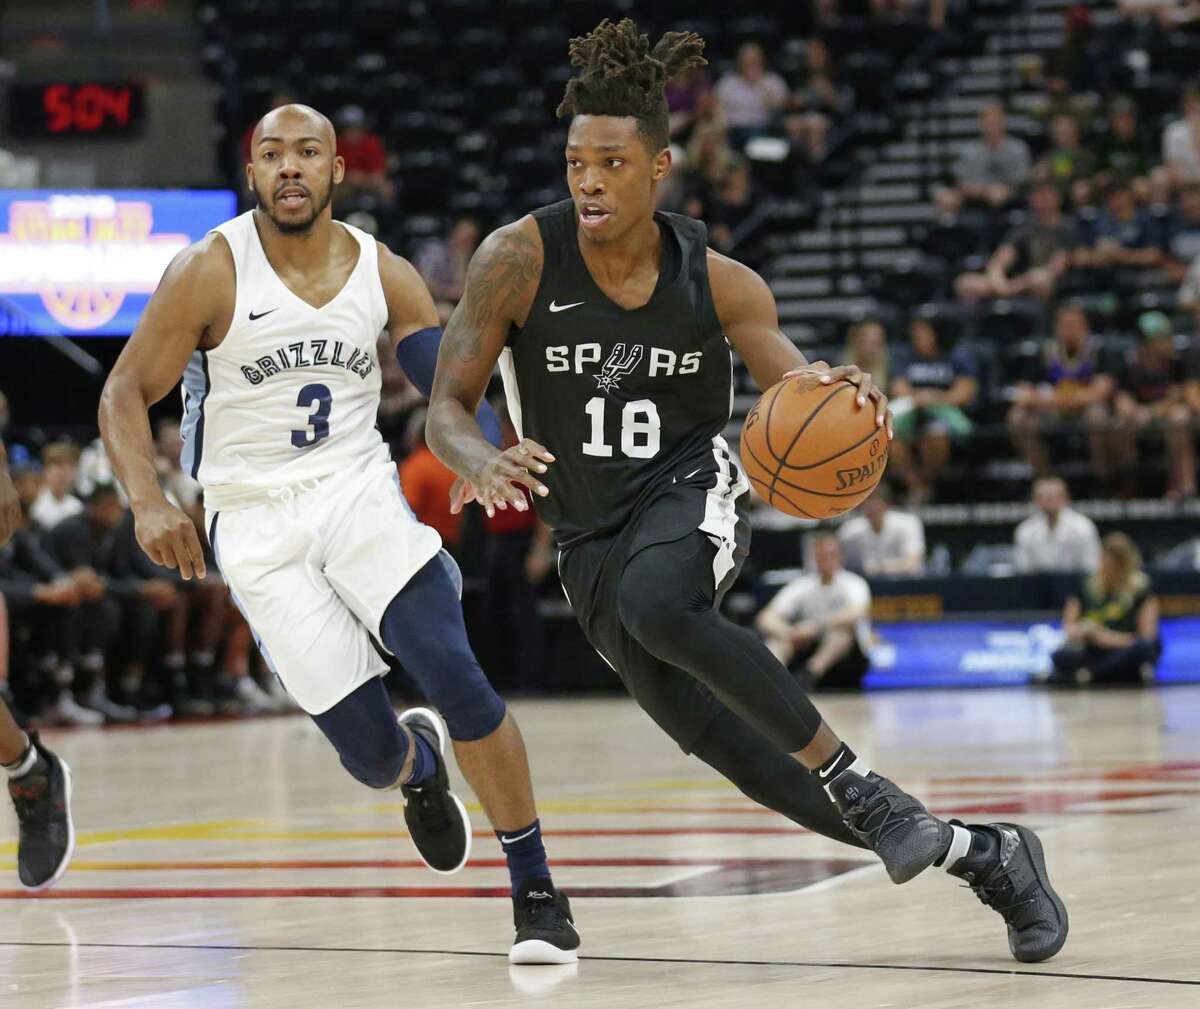 During the Summer League, Lonnie Walker IV sometimes resembled Manu Ginobili as he contorted his body away from defenders while driving.